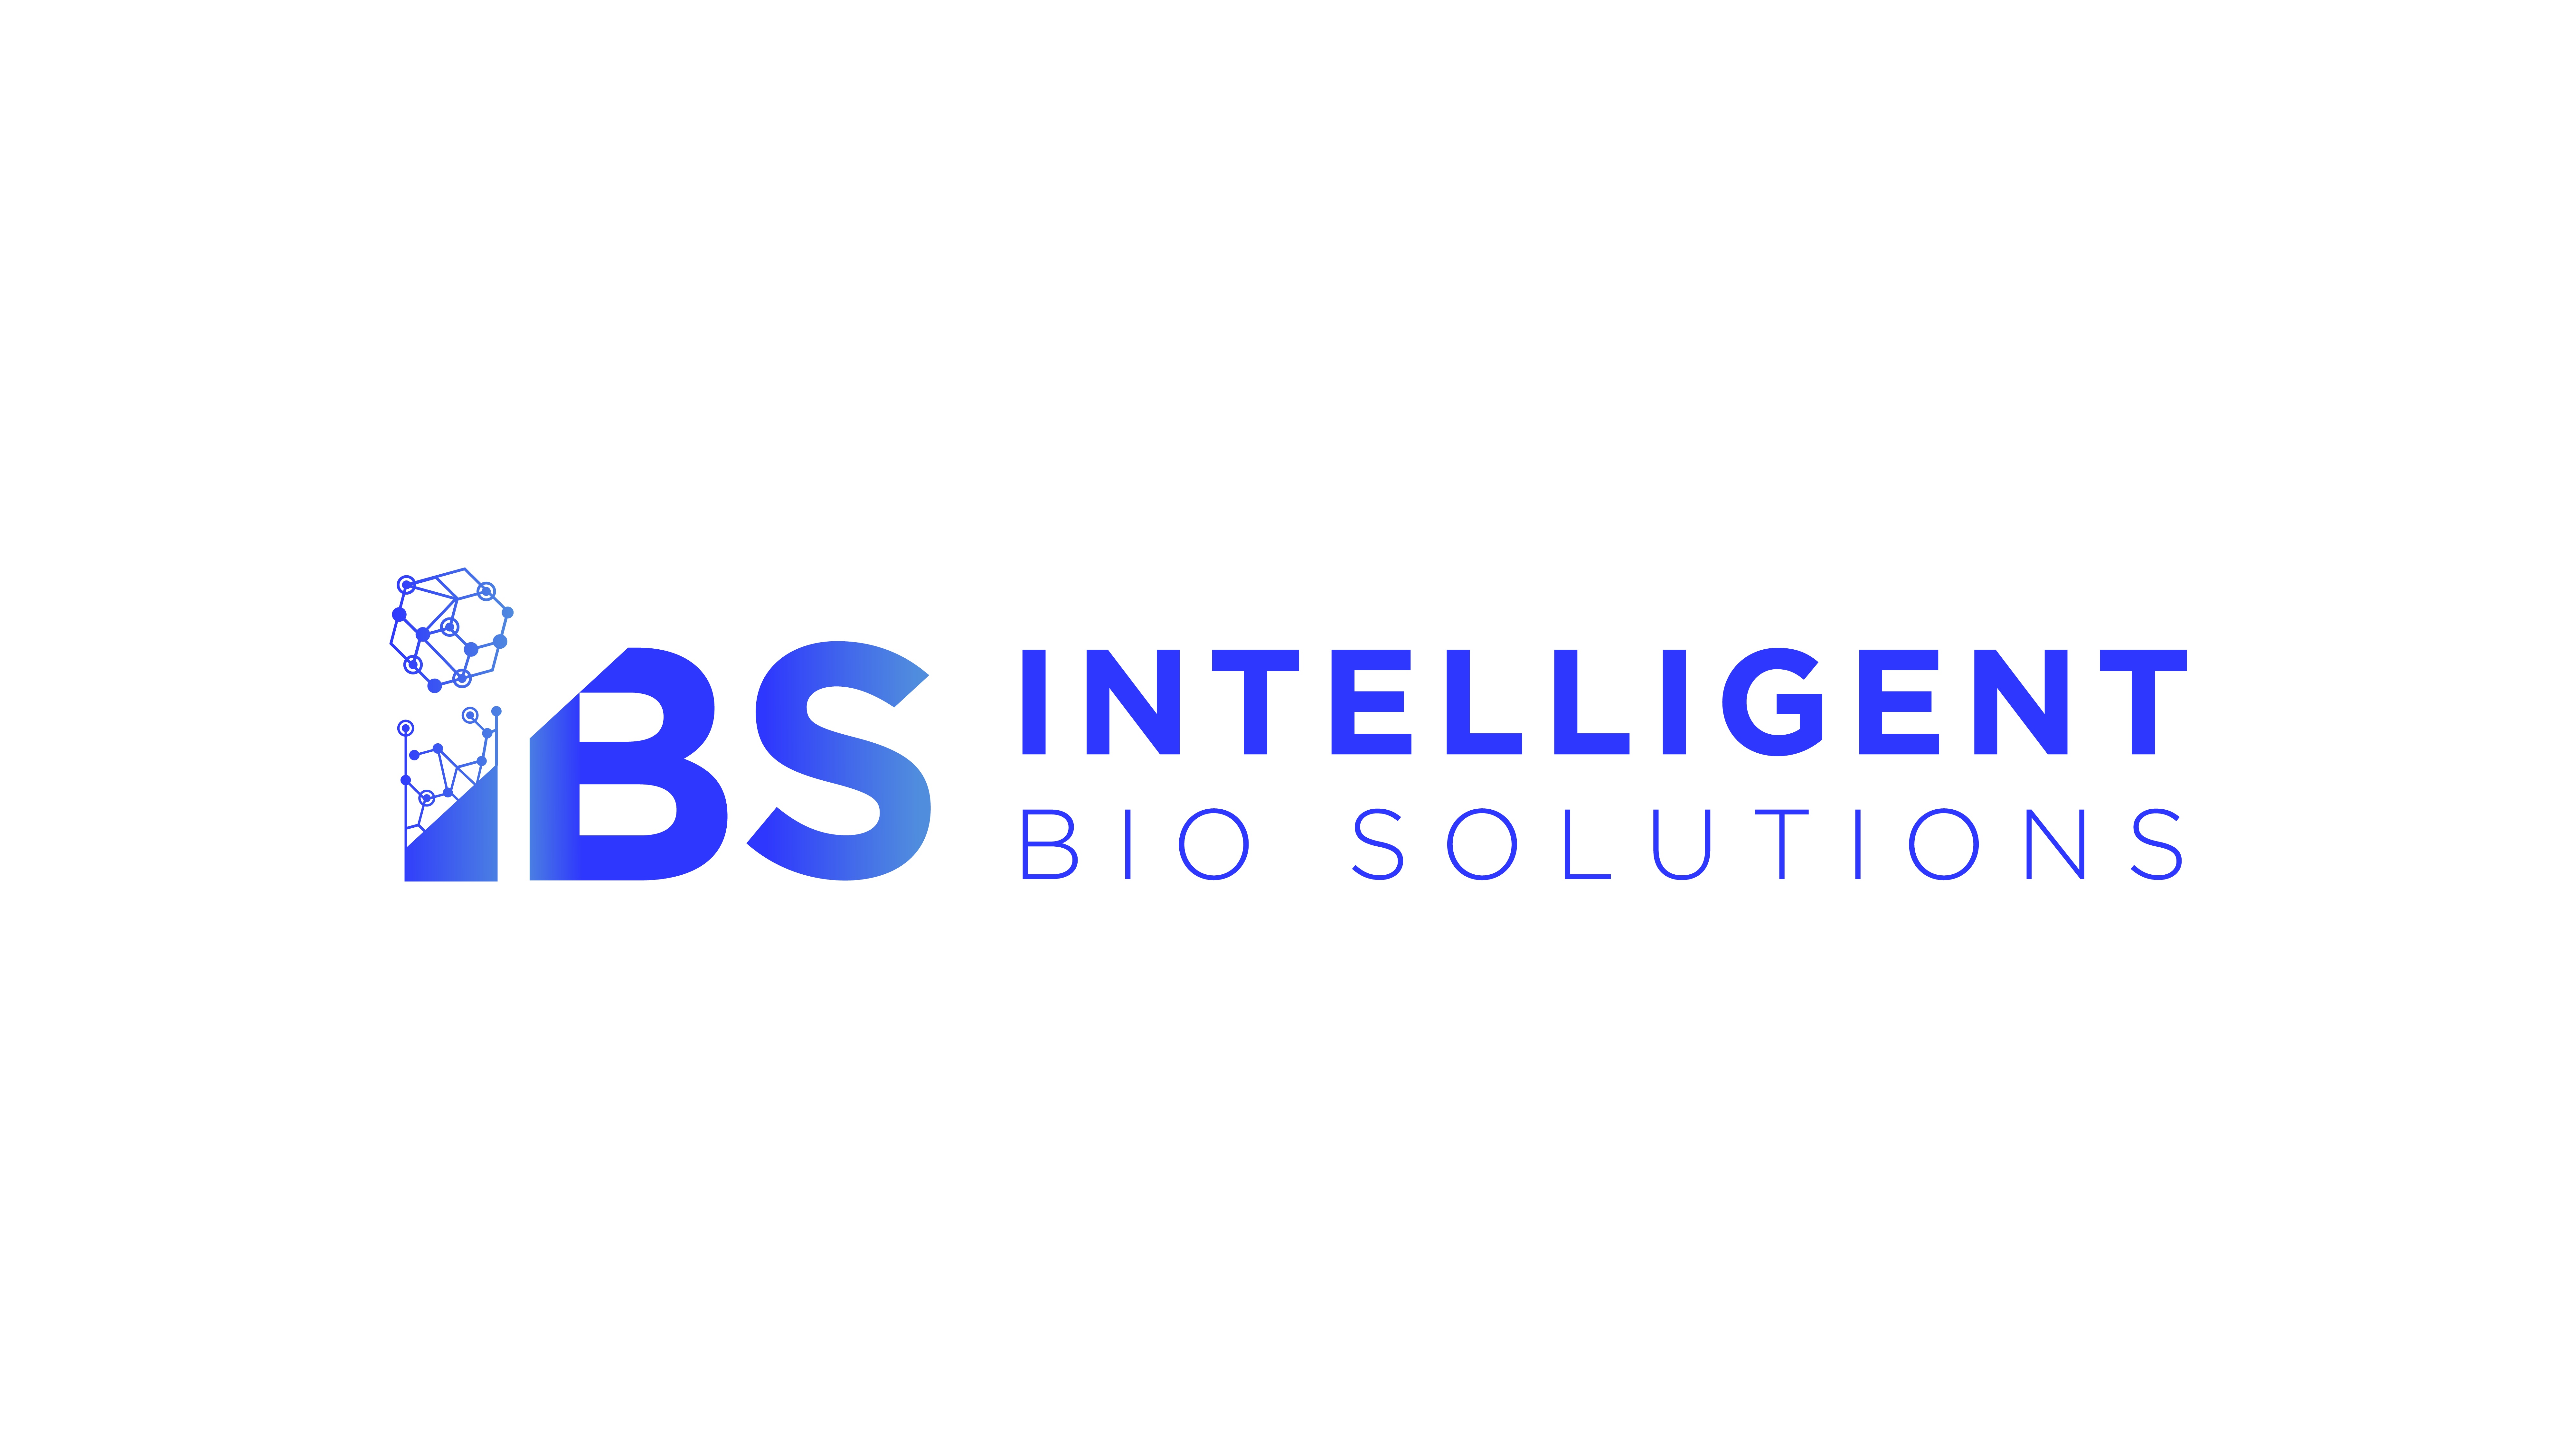 Intelligent Bio Solutions Signs South American Distribution Agreement with TSCOM for Fingerprint Drug Screening System and Secures First Order